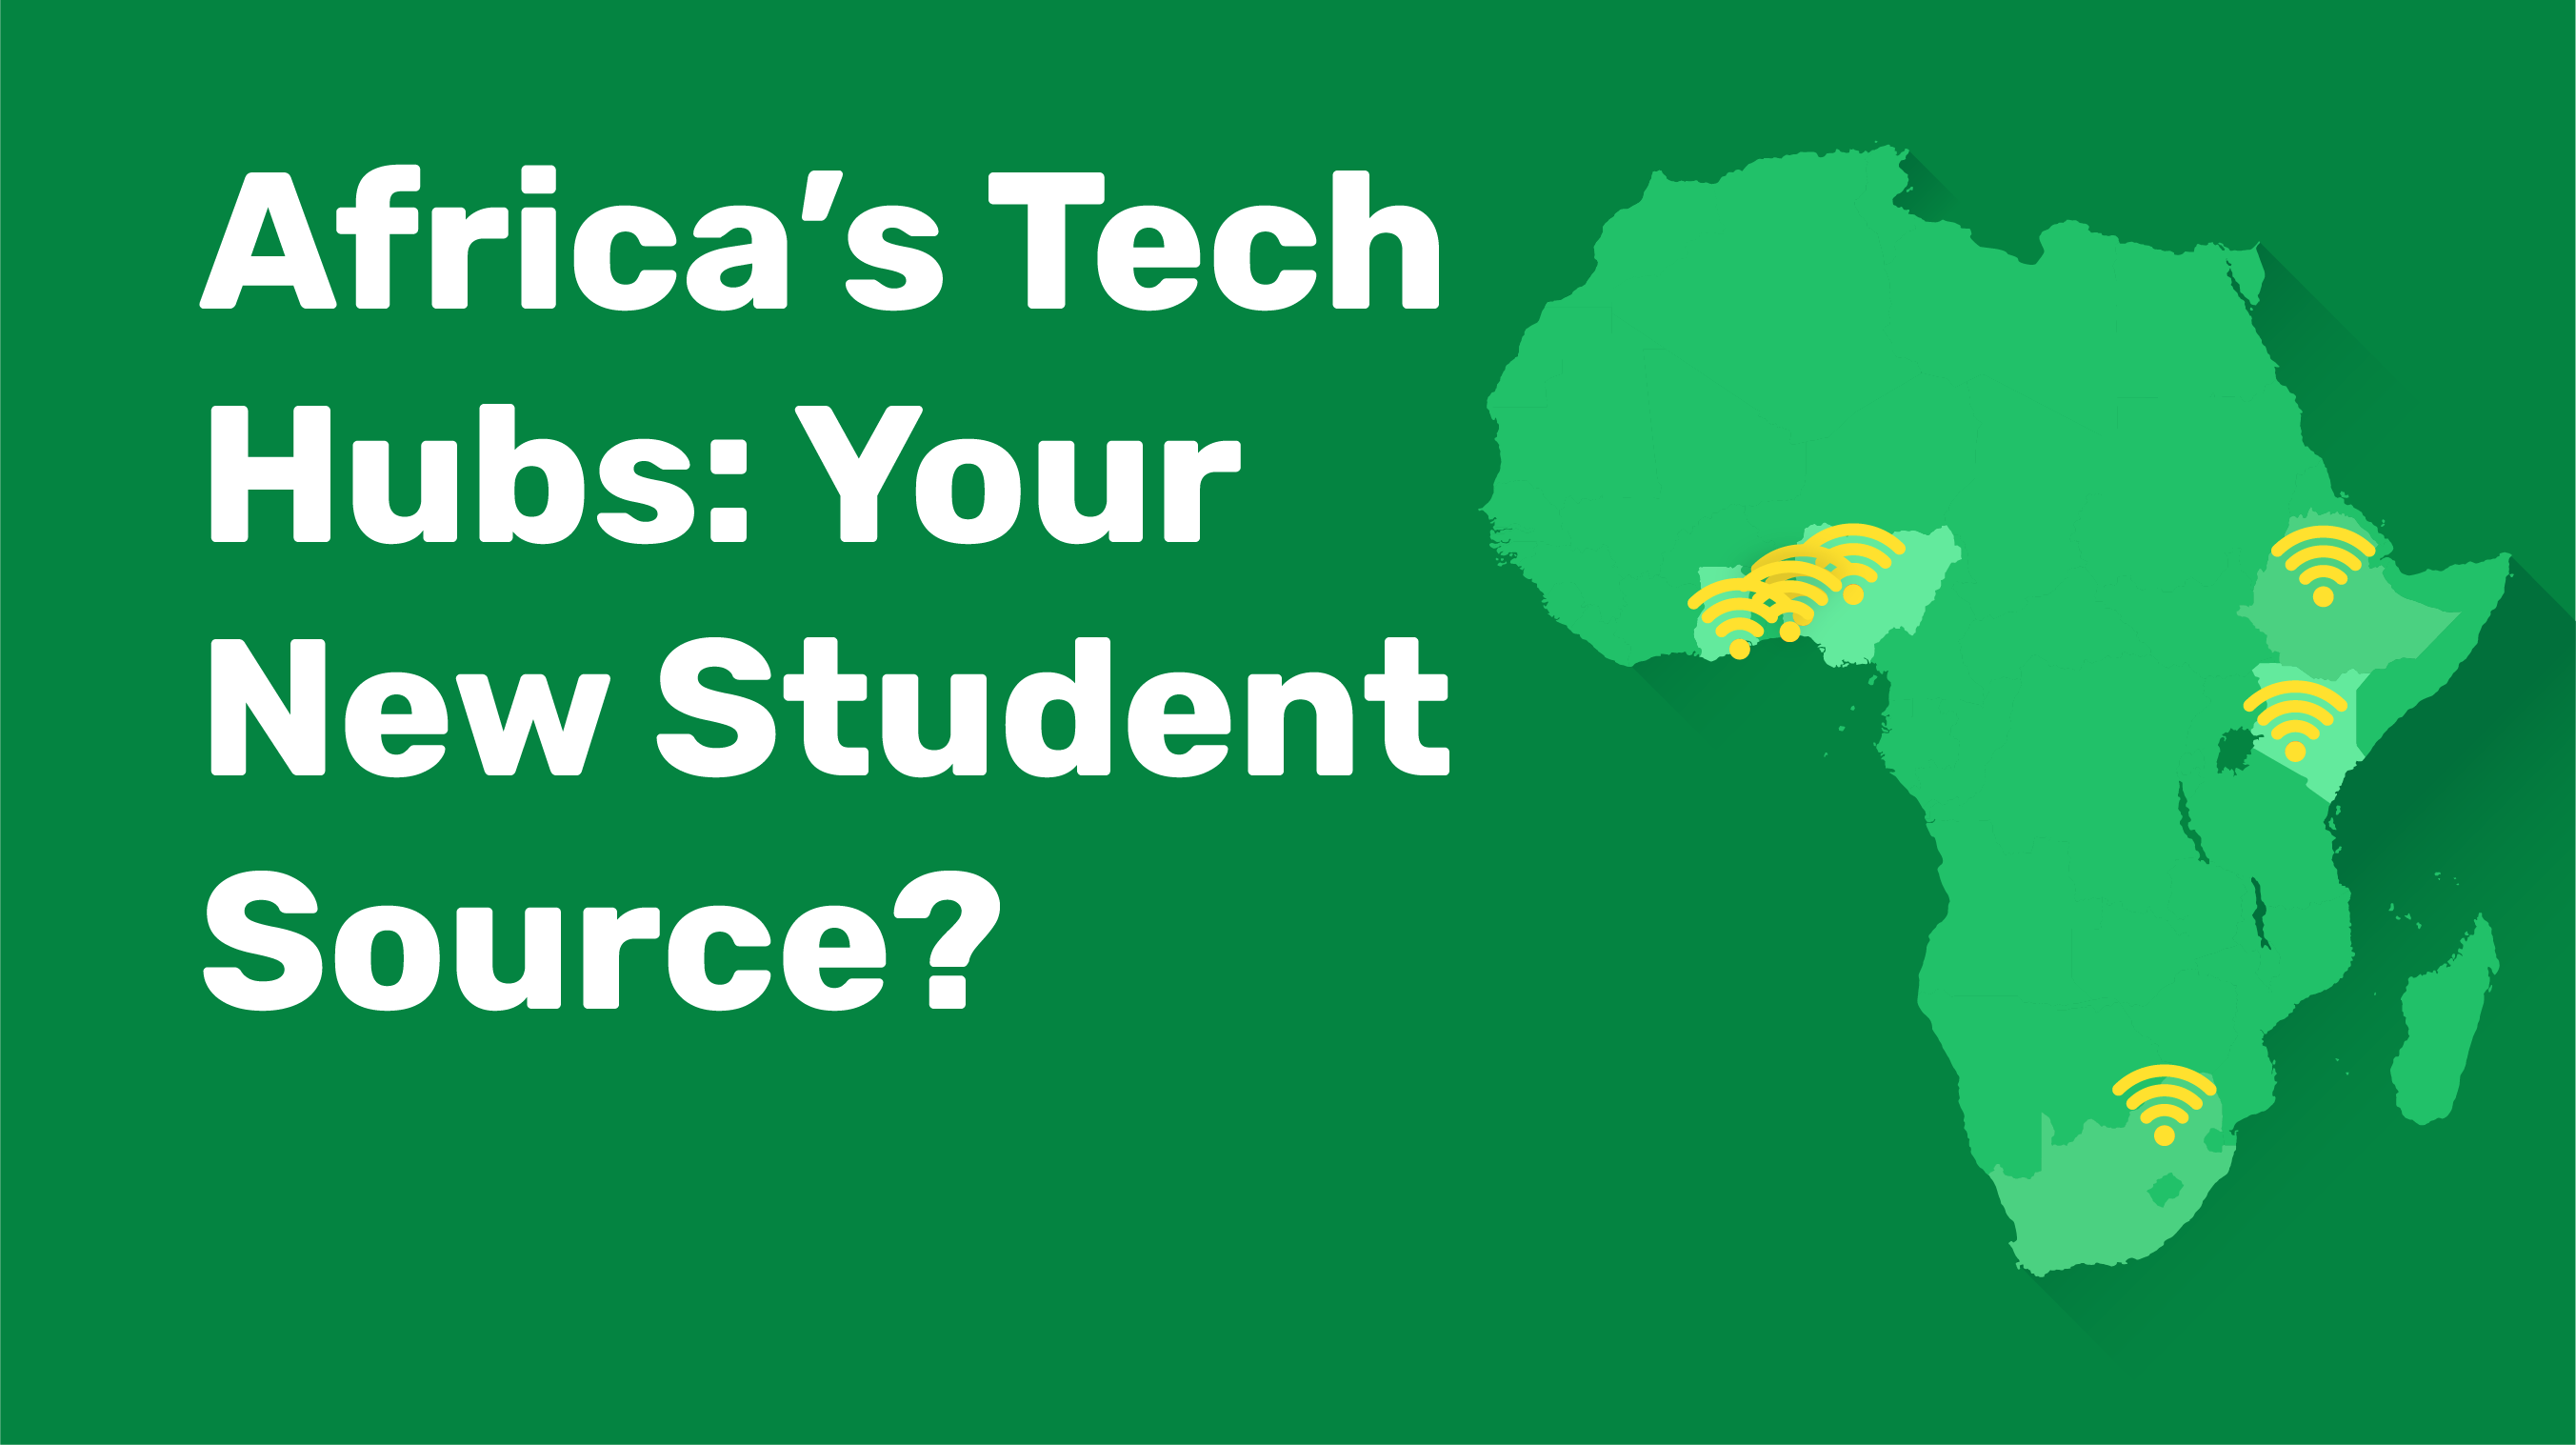 Africa's Tech Hubs: Your New Student Source?